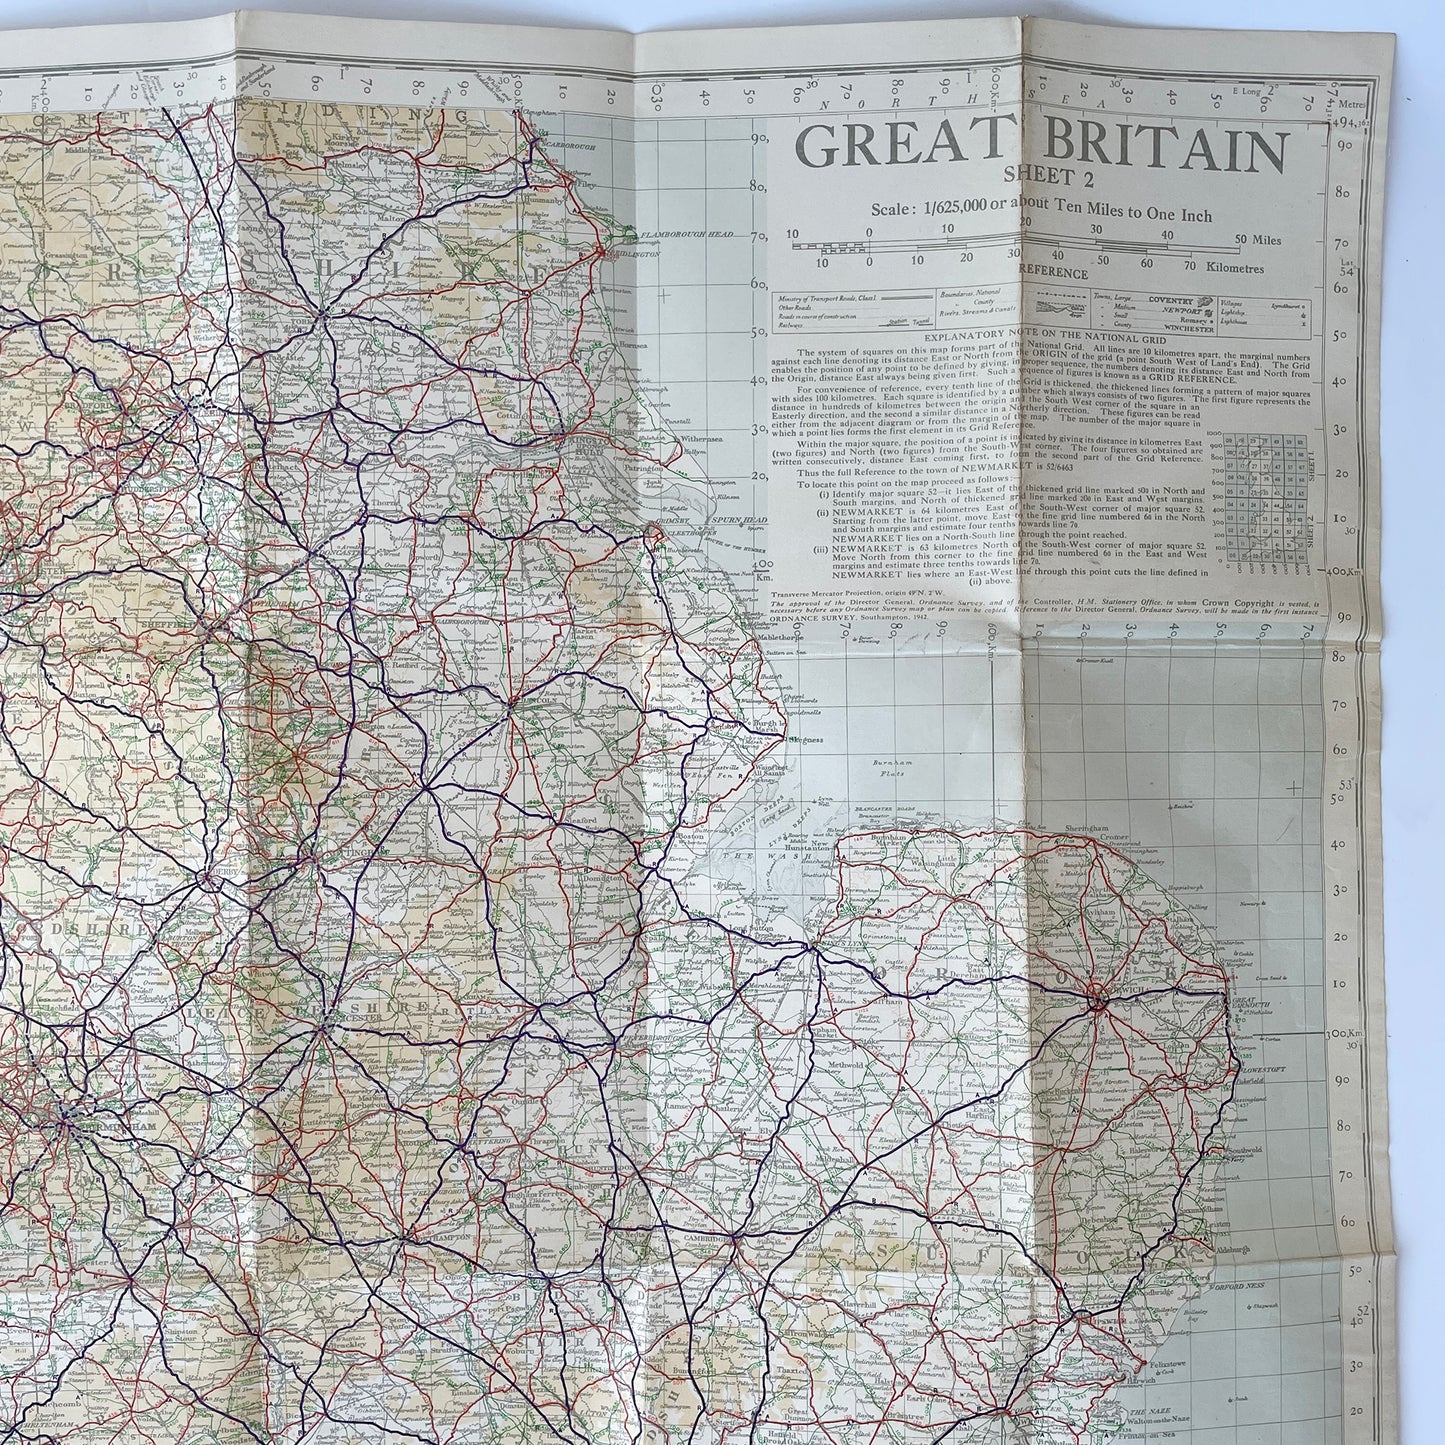 1946 Ordnance Survey Road Map of Great Britain – Sheet 2 (Southern Section)